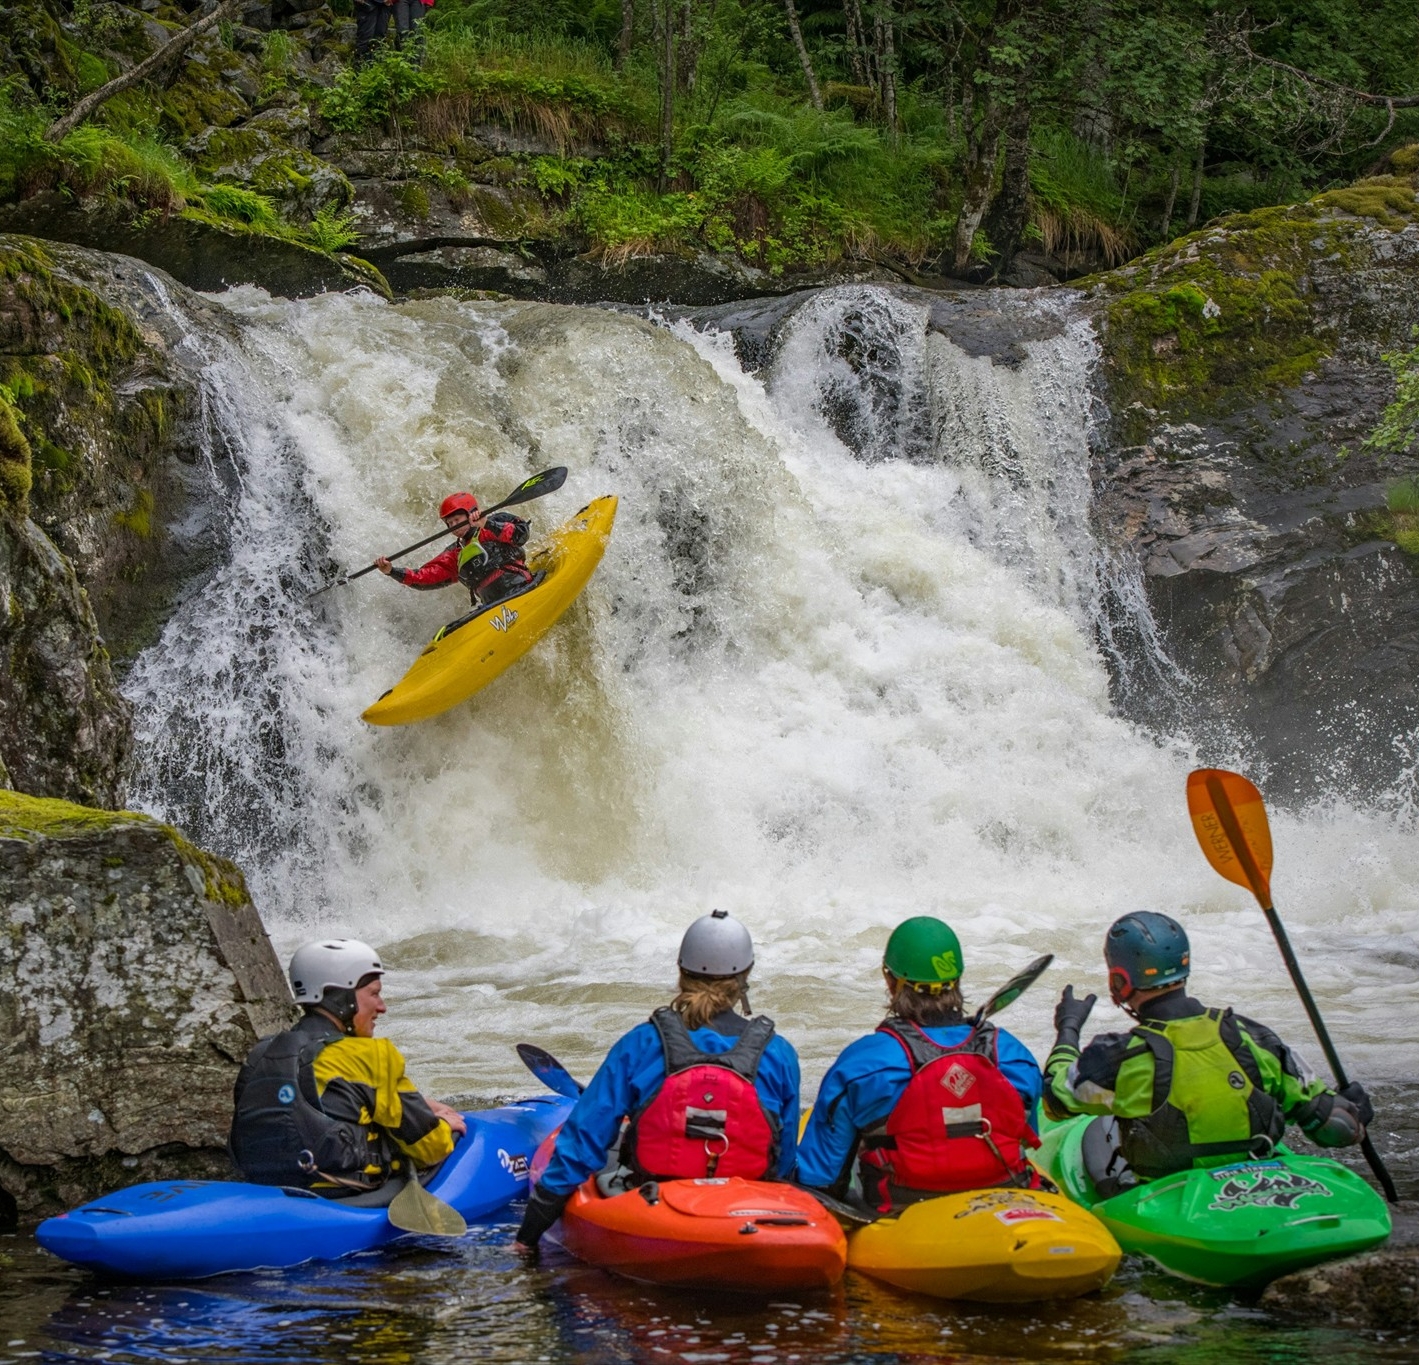 A group of people in kayaks sitting by a waterfall.